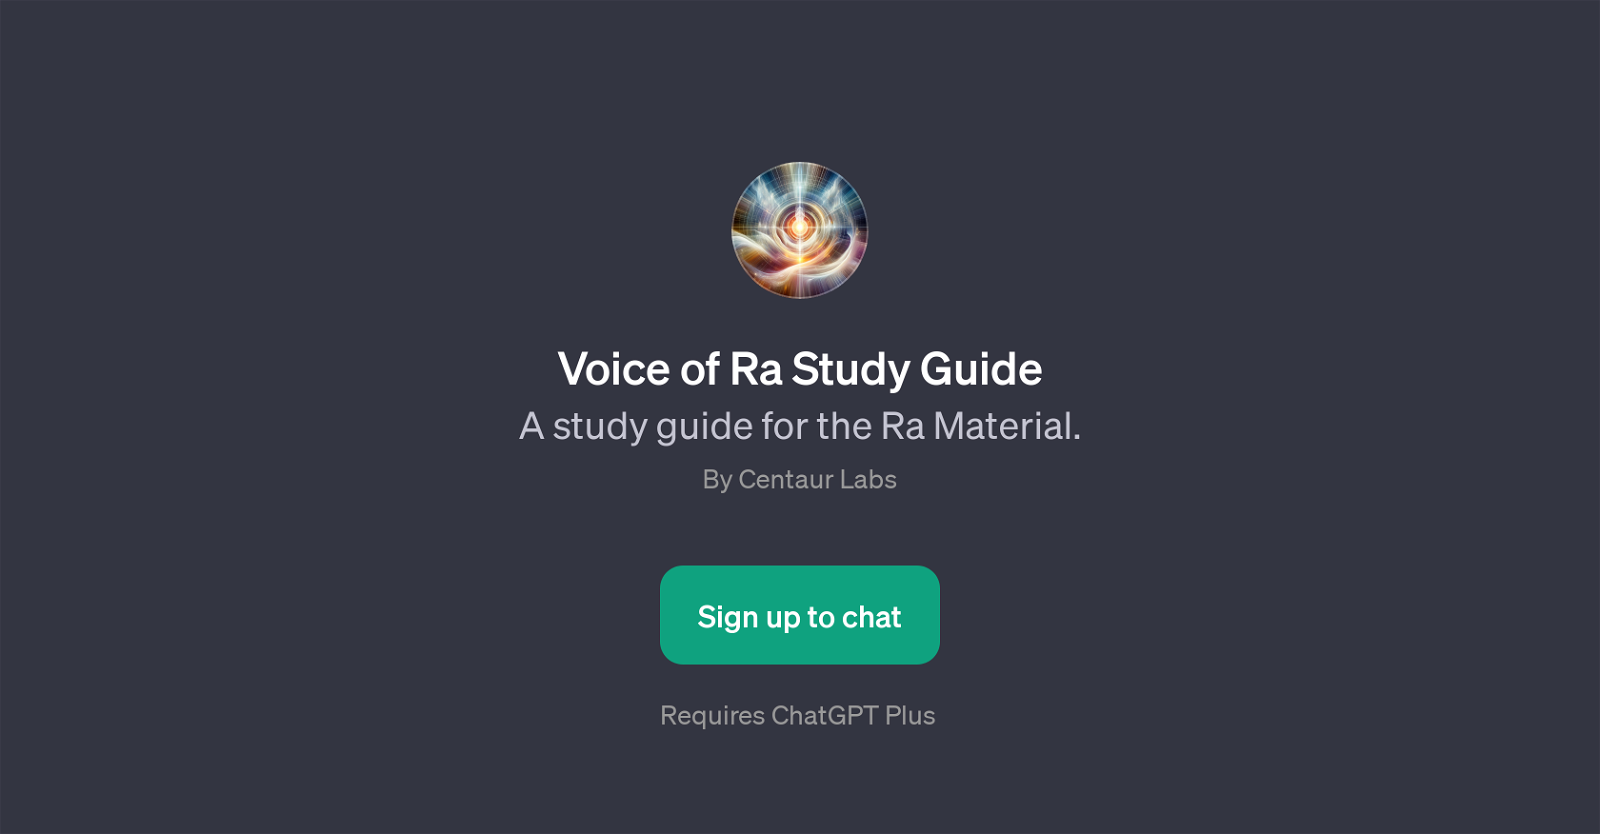 Voice of Ra Study Guide website